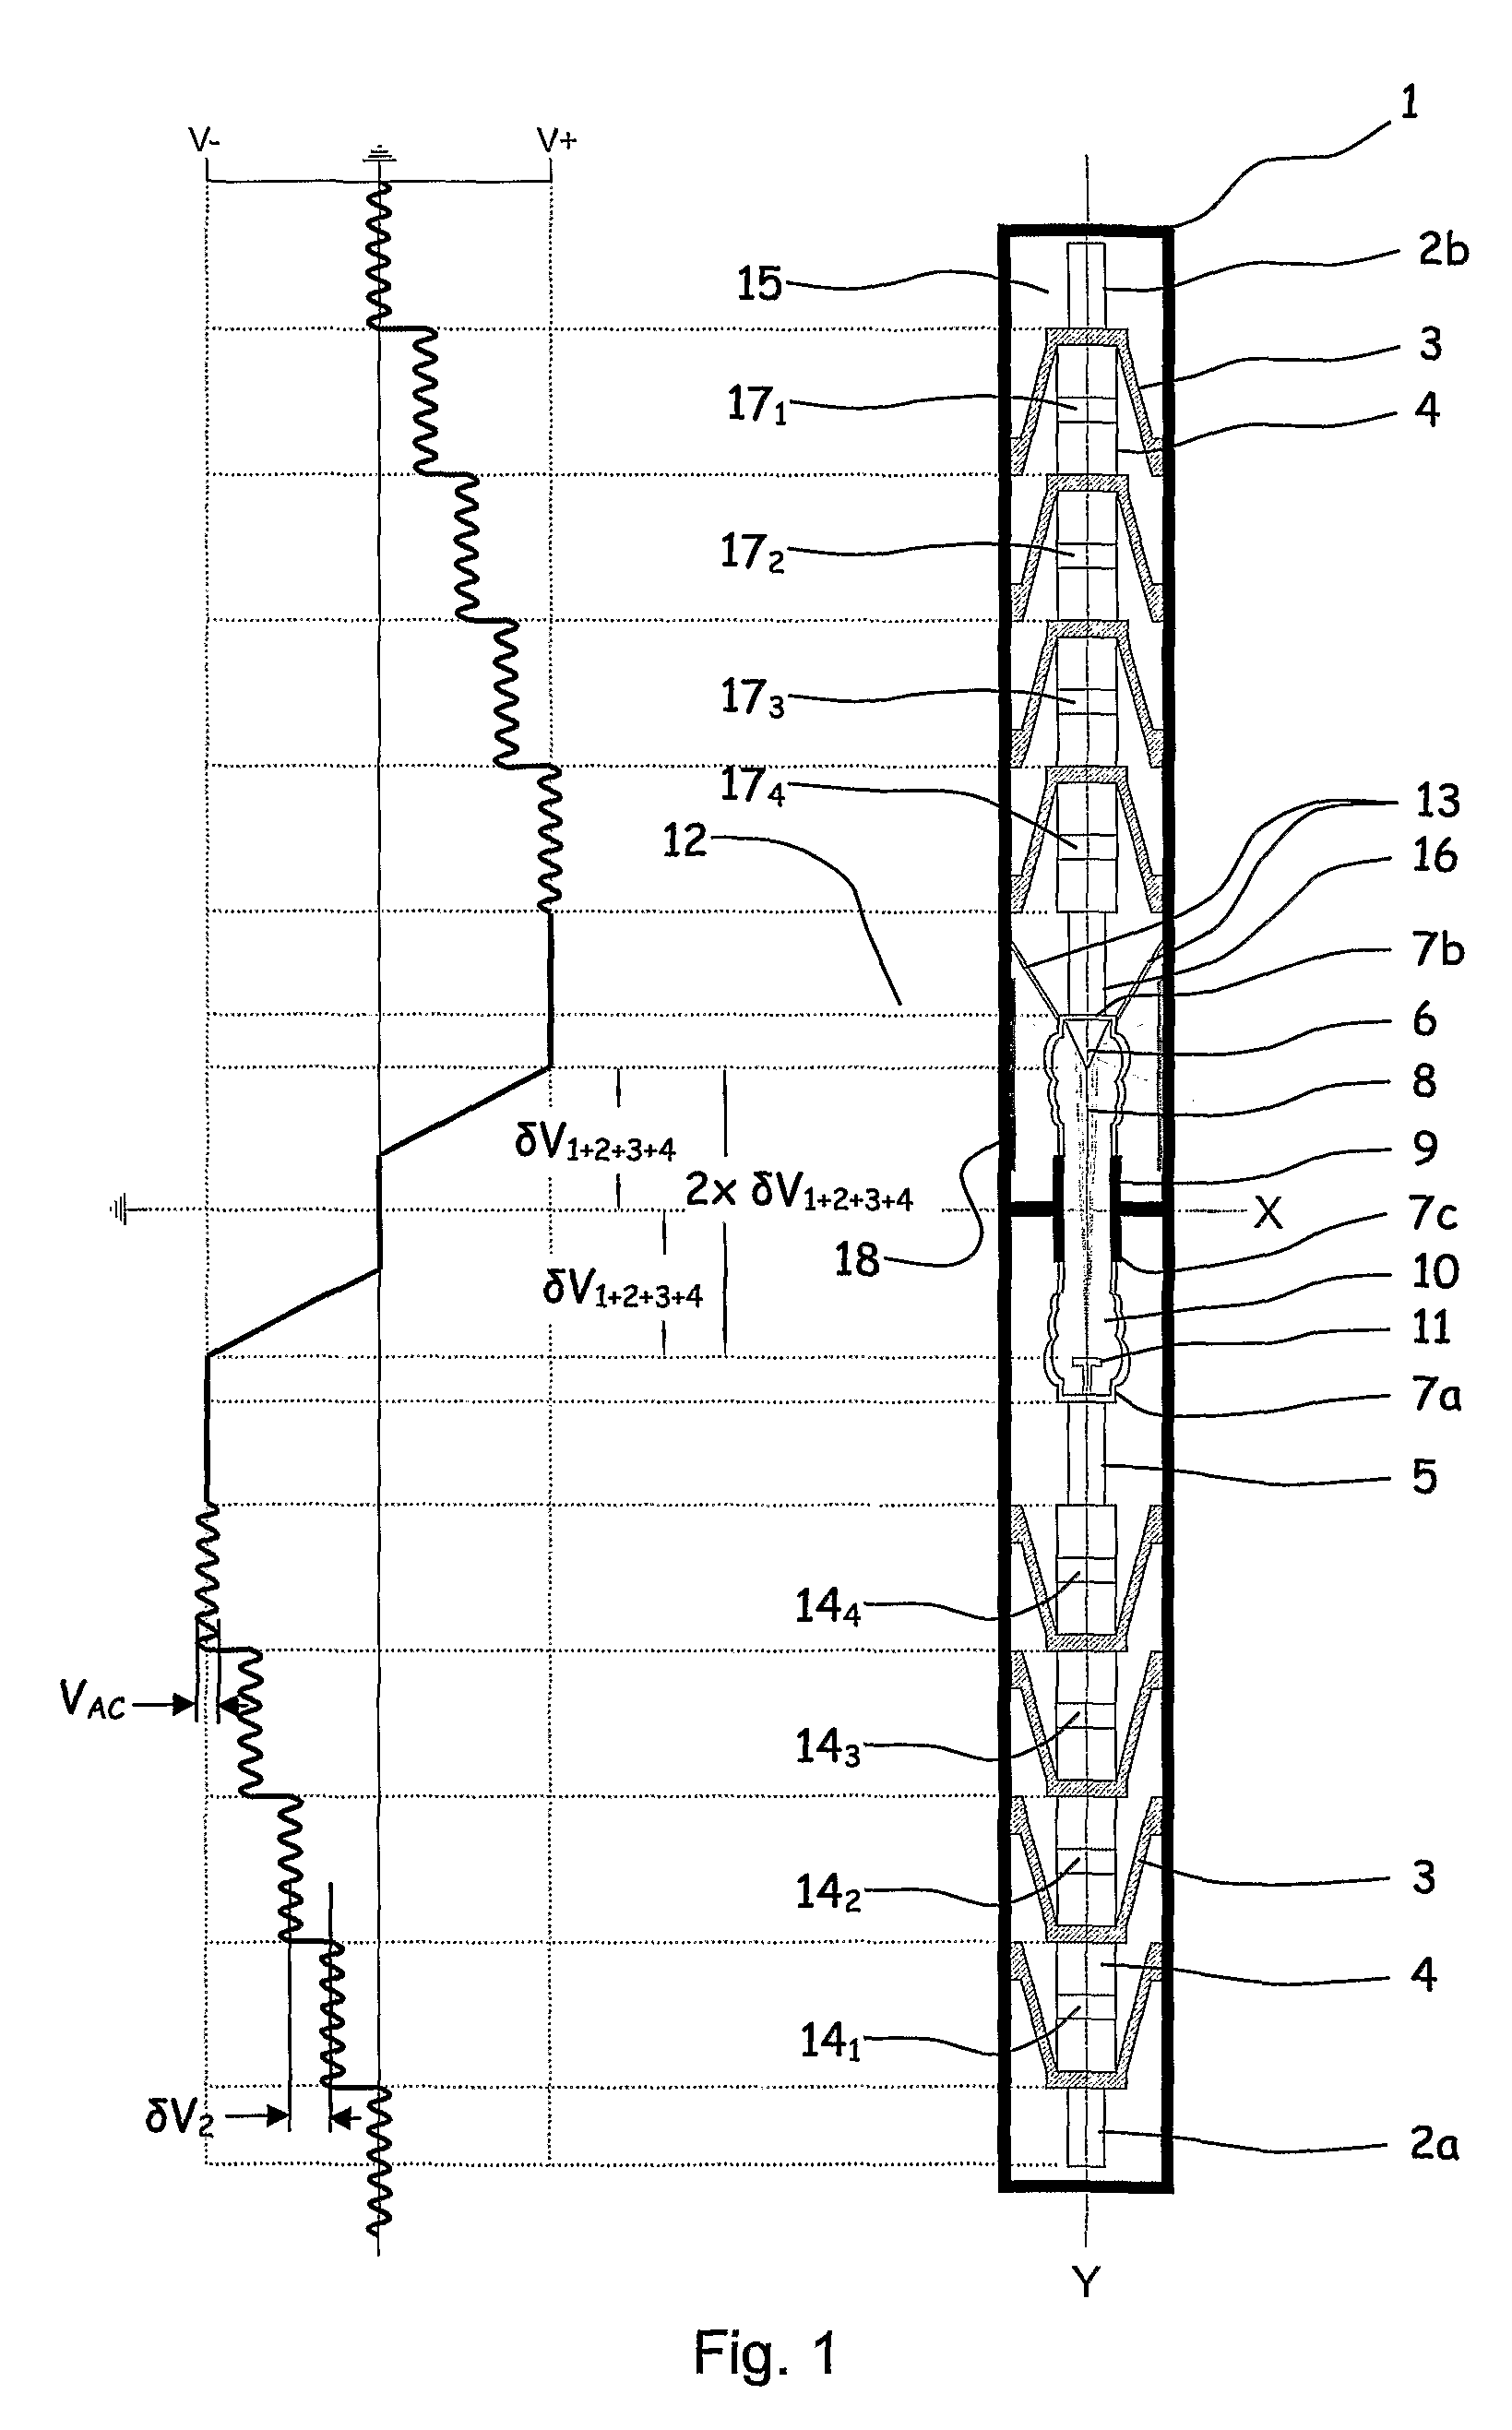 Apparatus and method for controllable downhole production of ionizing radiation without the use of radioactive chemical isotopes